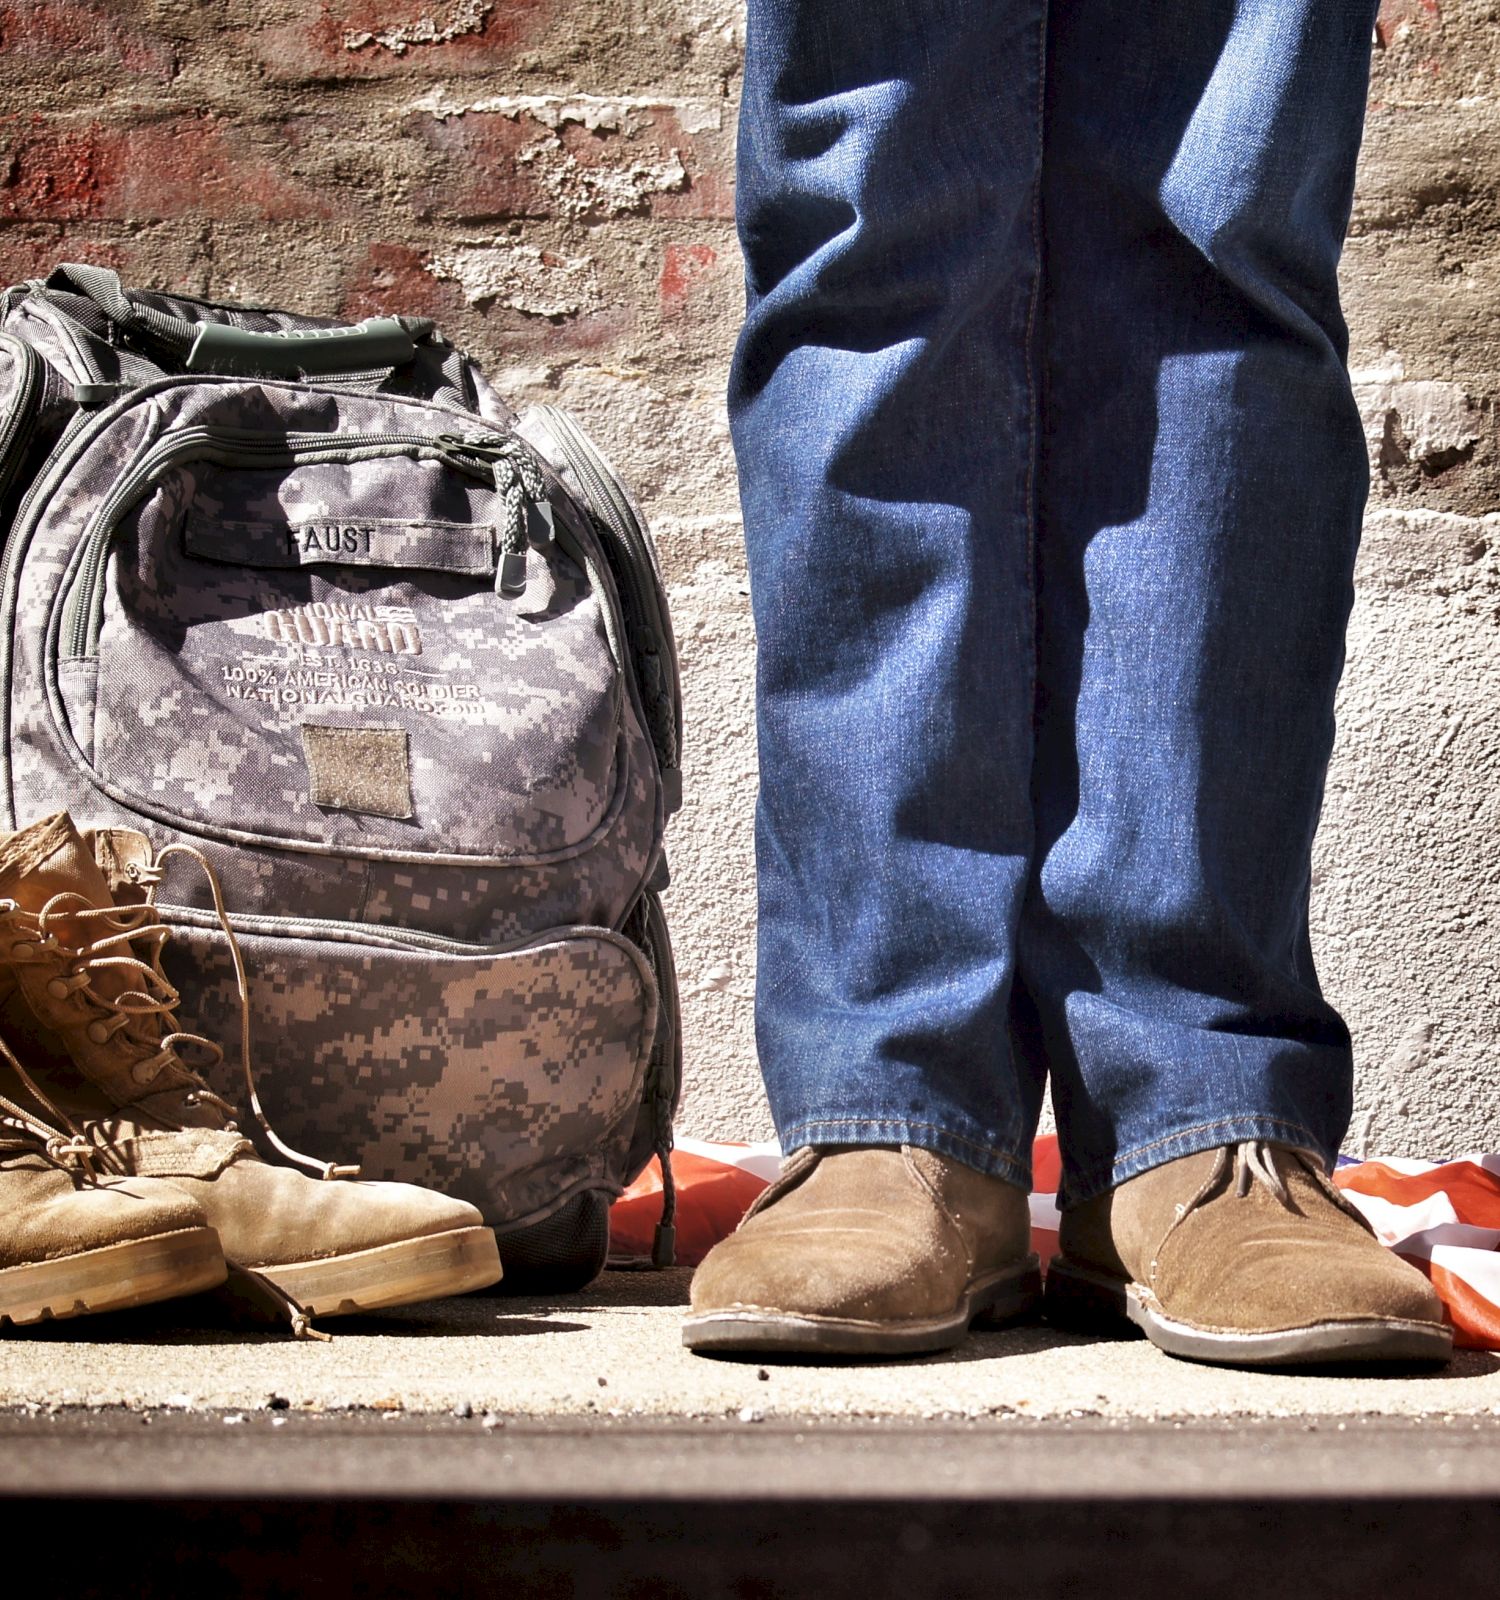 A person in jeans stands beside military boots, a camouflage backpack, and a partially visible flag on the ground, against a brick wall.